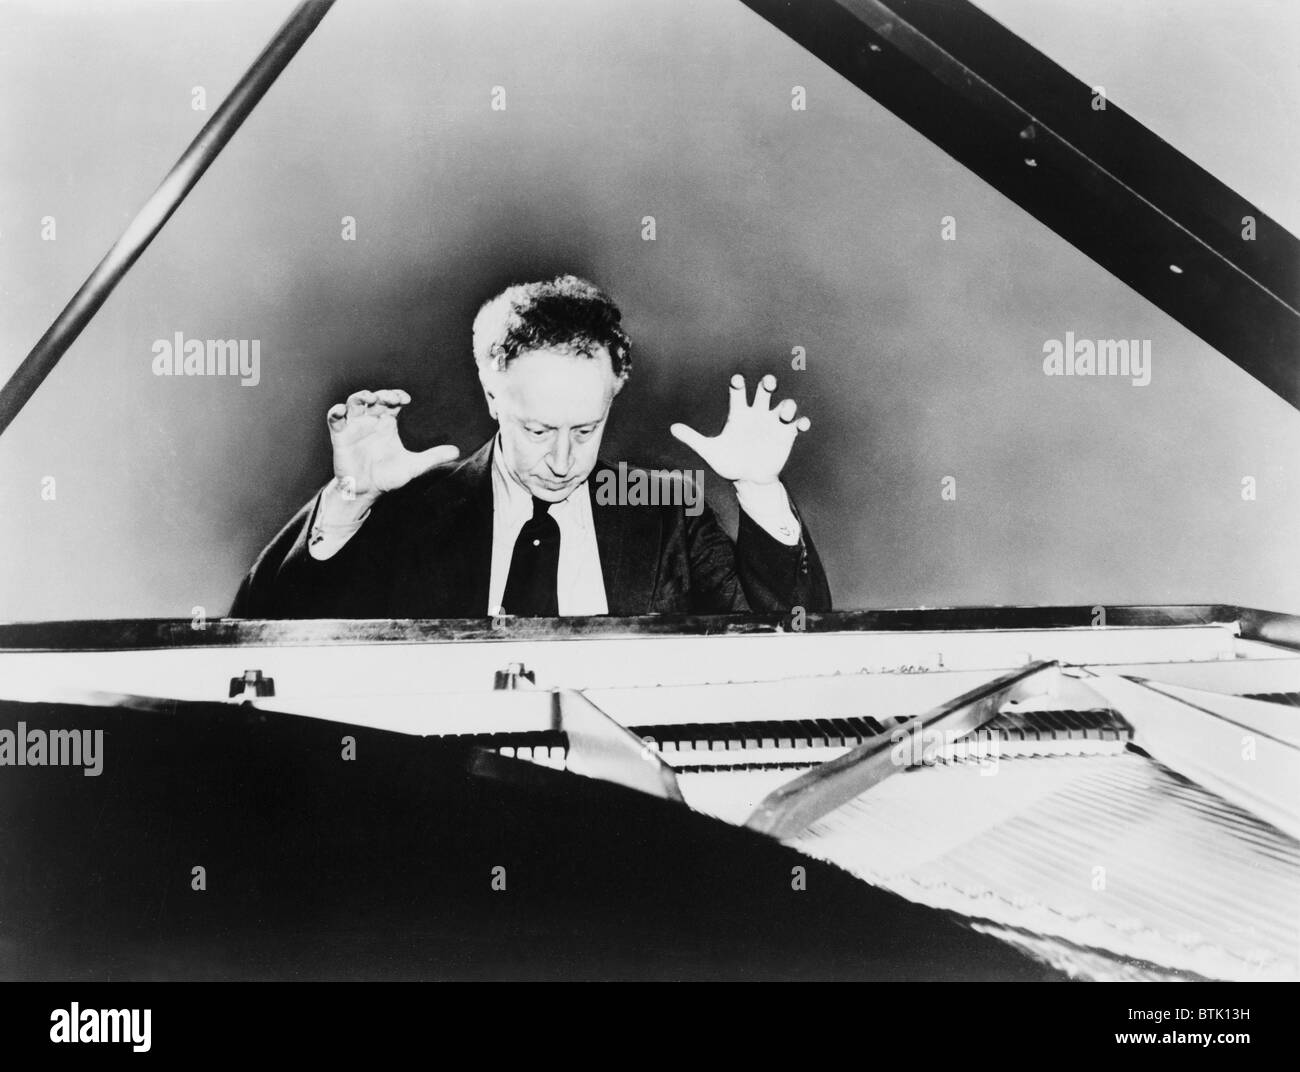 Artur Rubinstein (1887-1982), a grand piano, with his hands raised in 1961. The Polish born pianist became an American citizen in 1946. Stock Photo